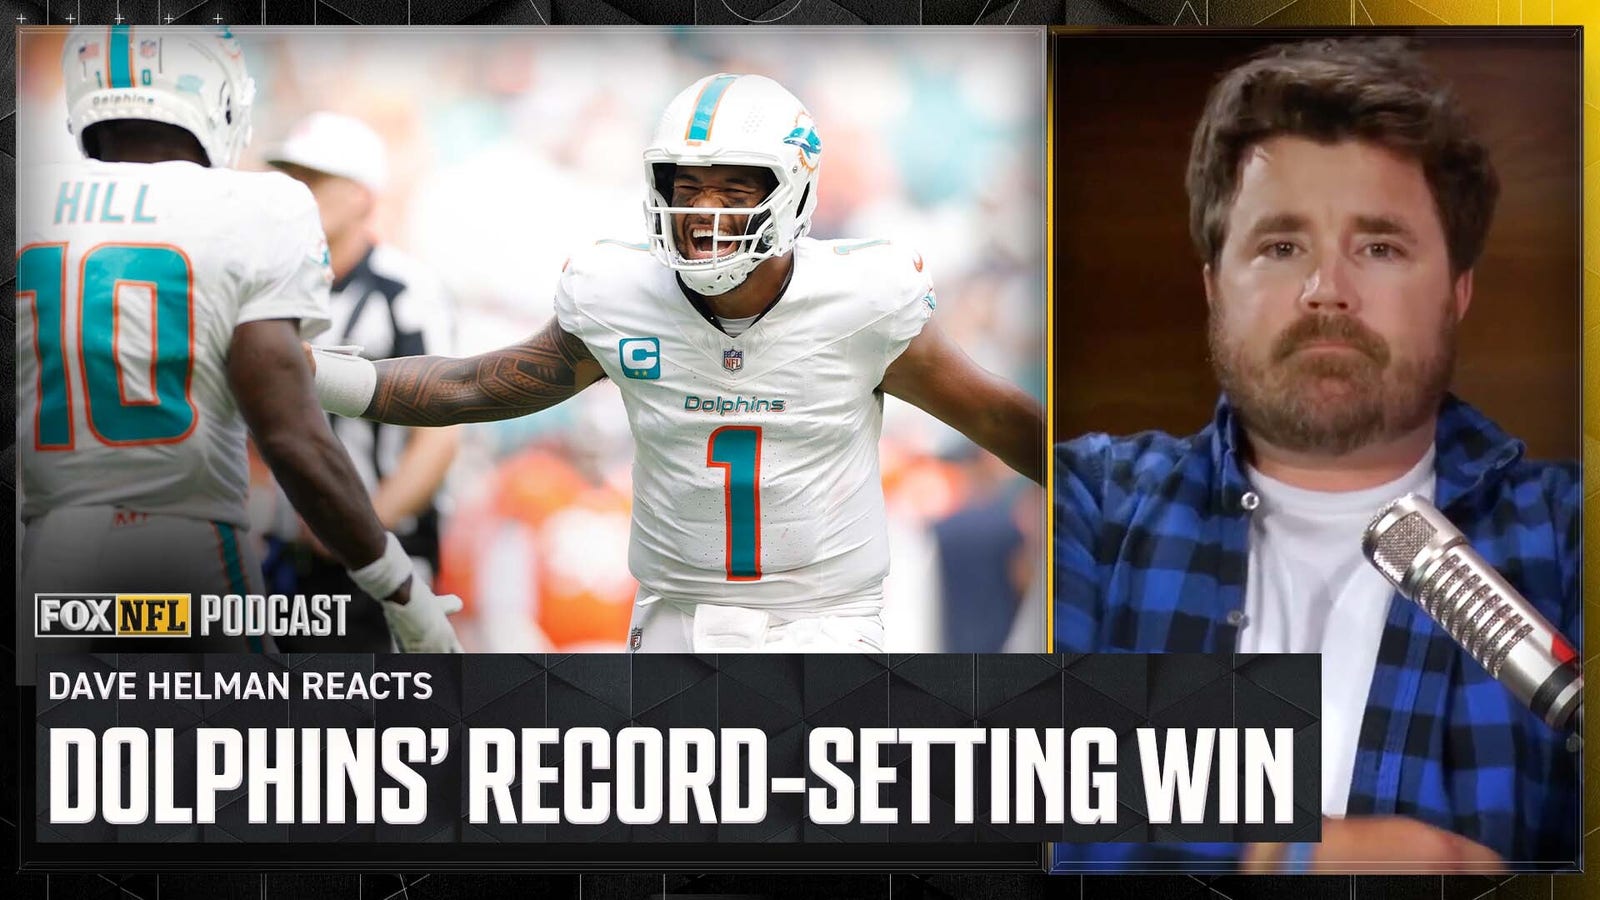 Dave Helman on Dolphins' historic win